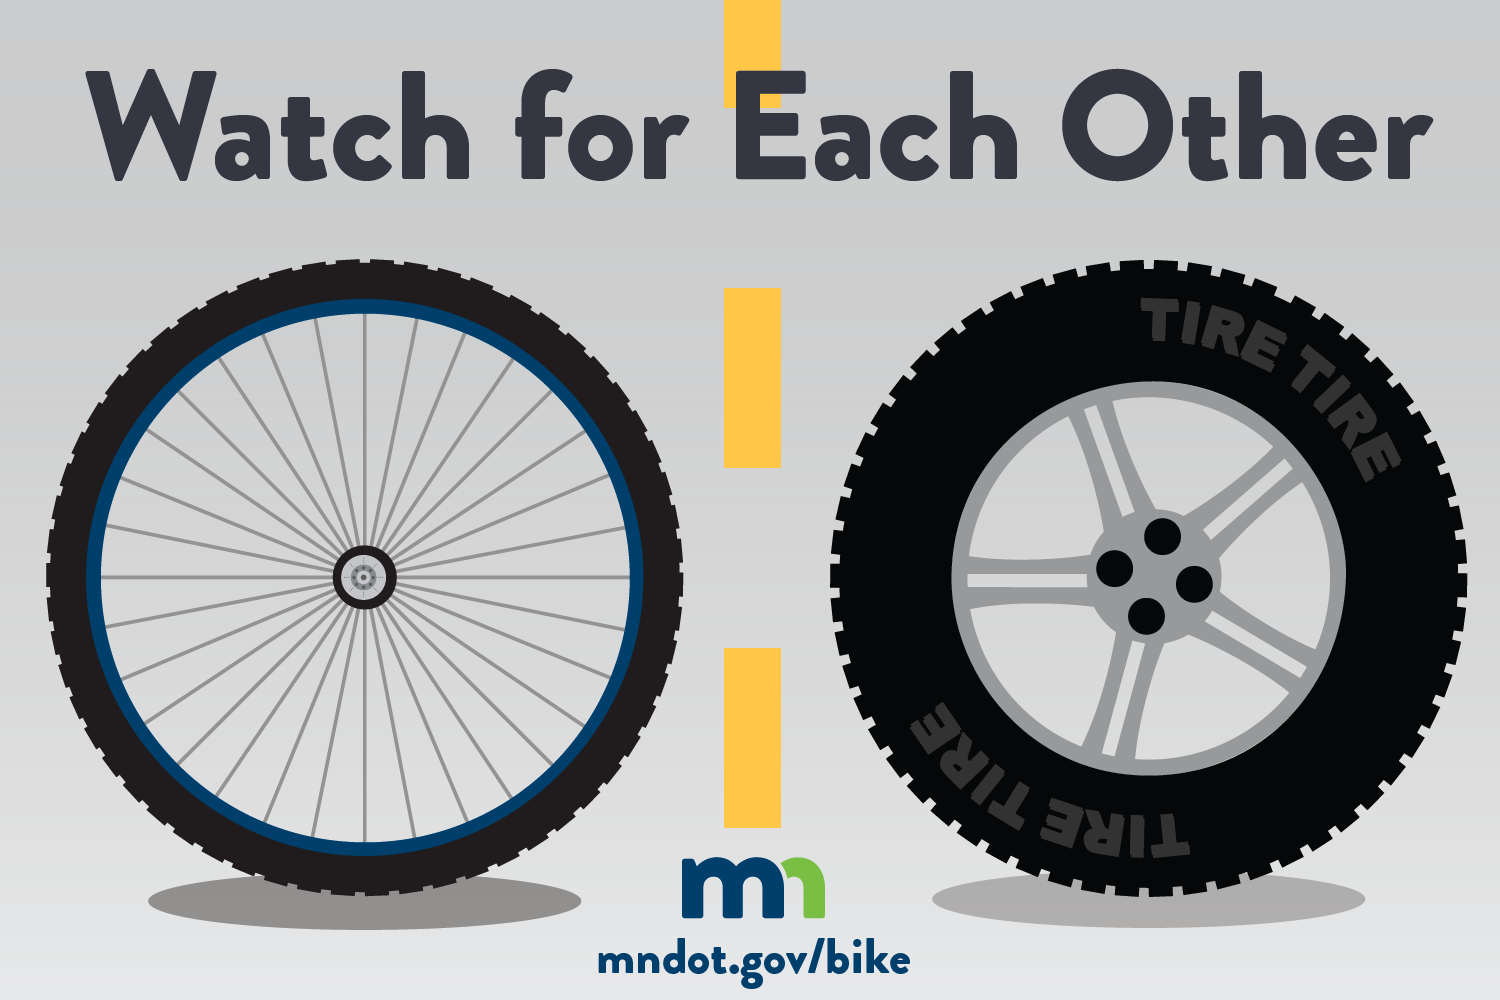 Watch for each other: People who bike and people who drive should watch out for each other.